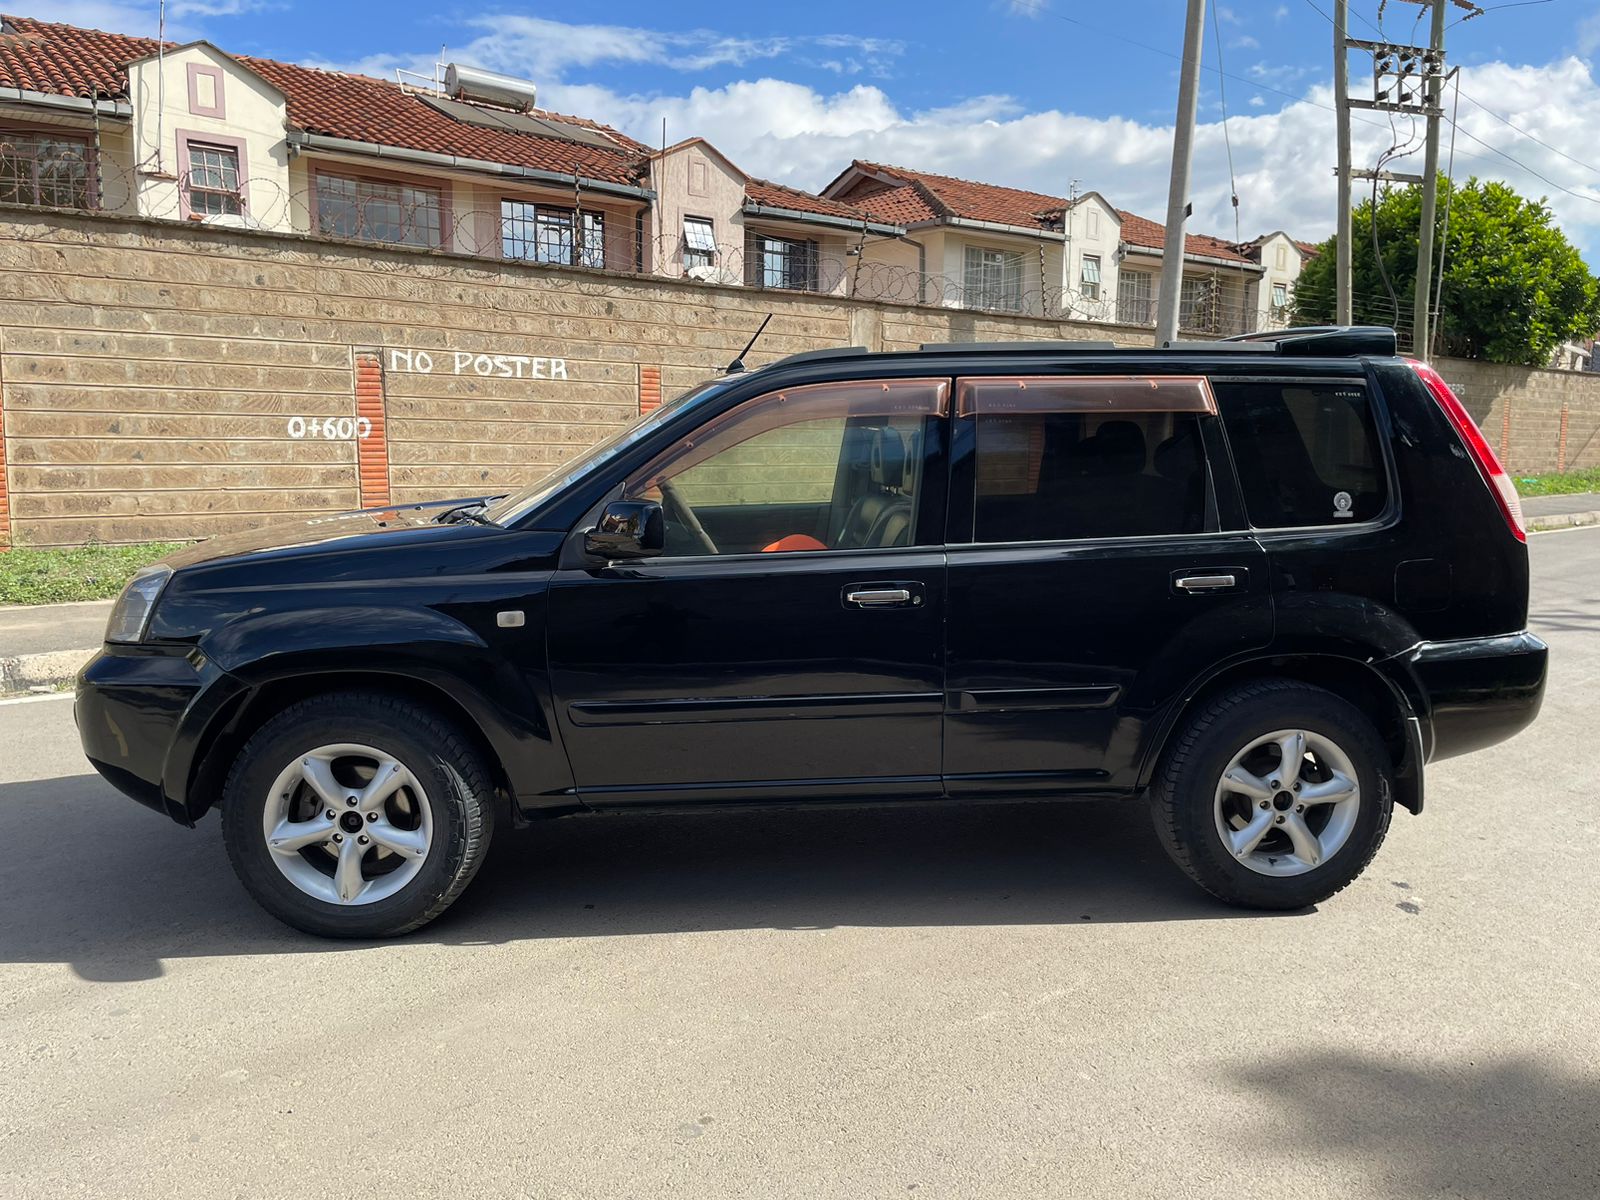 Nissan XTRAIL 2006 SUNROOF You Pay 20% Deposit Trade in Ok HOT DEAL!